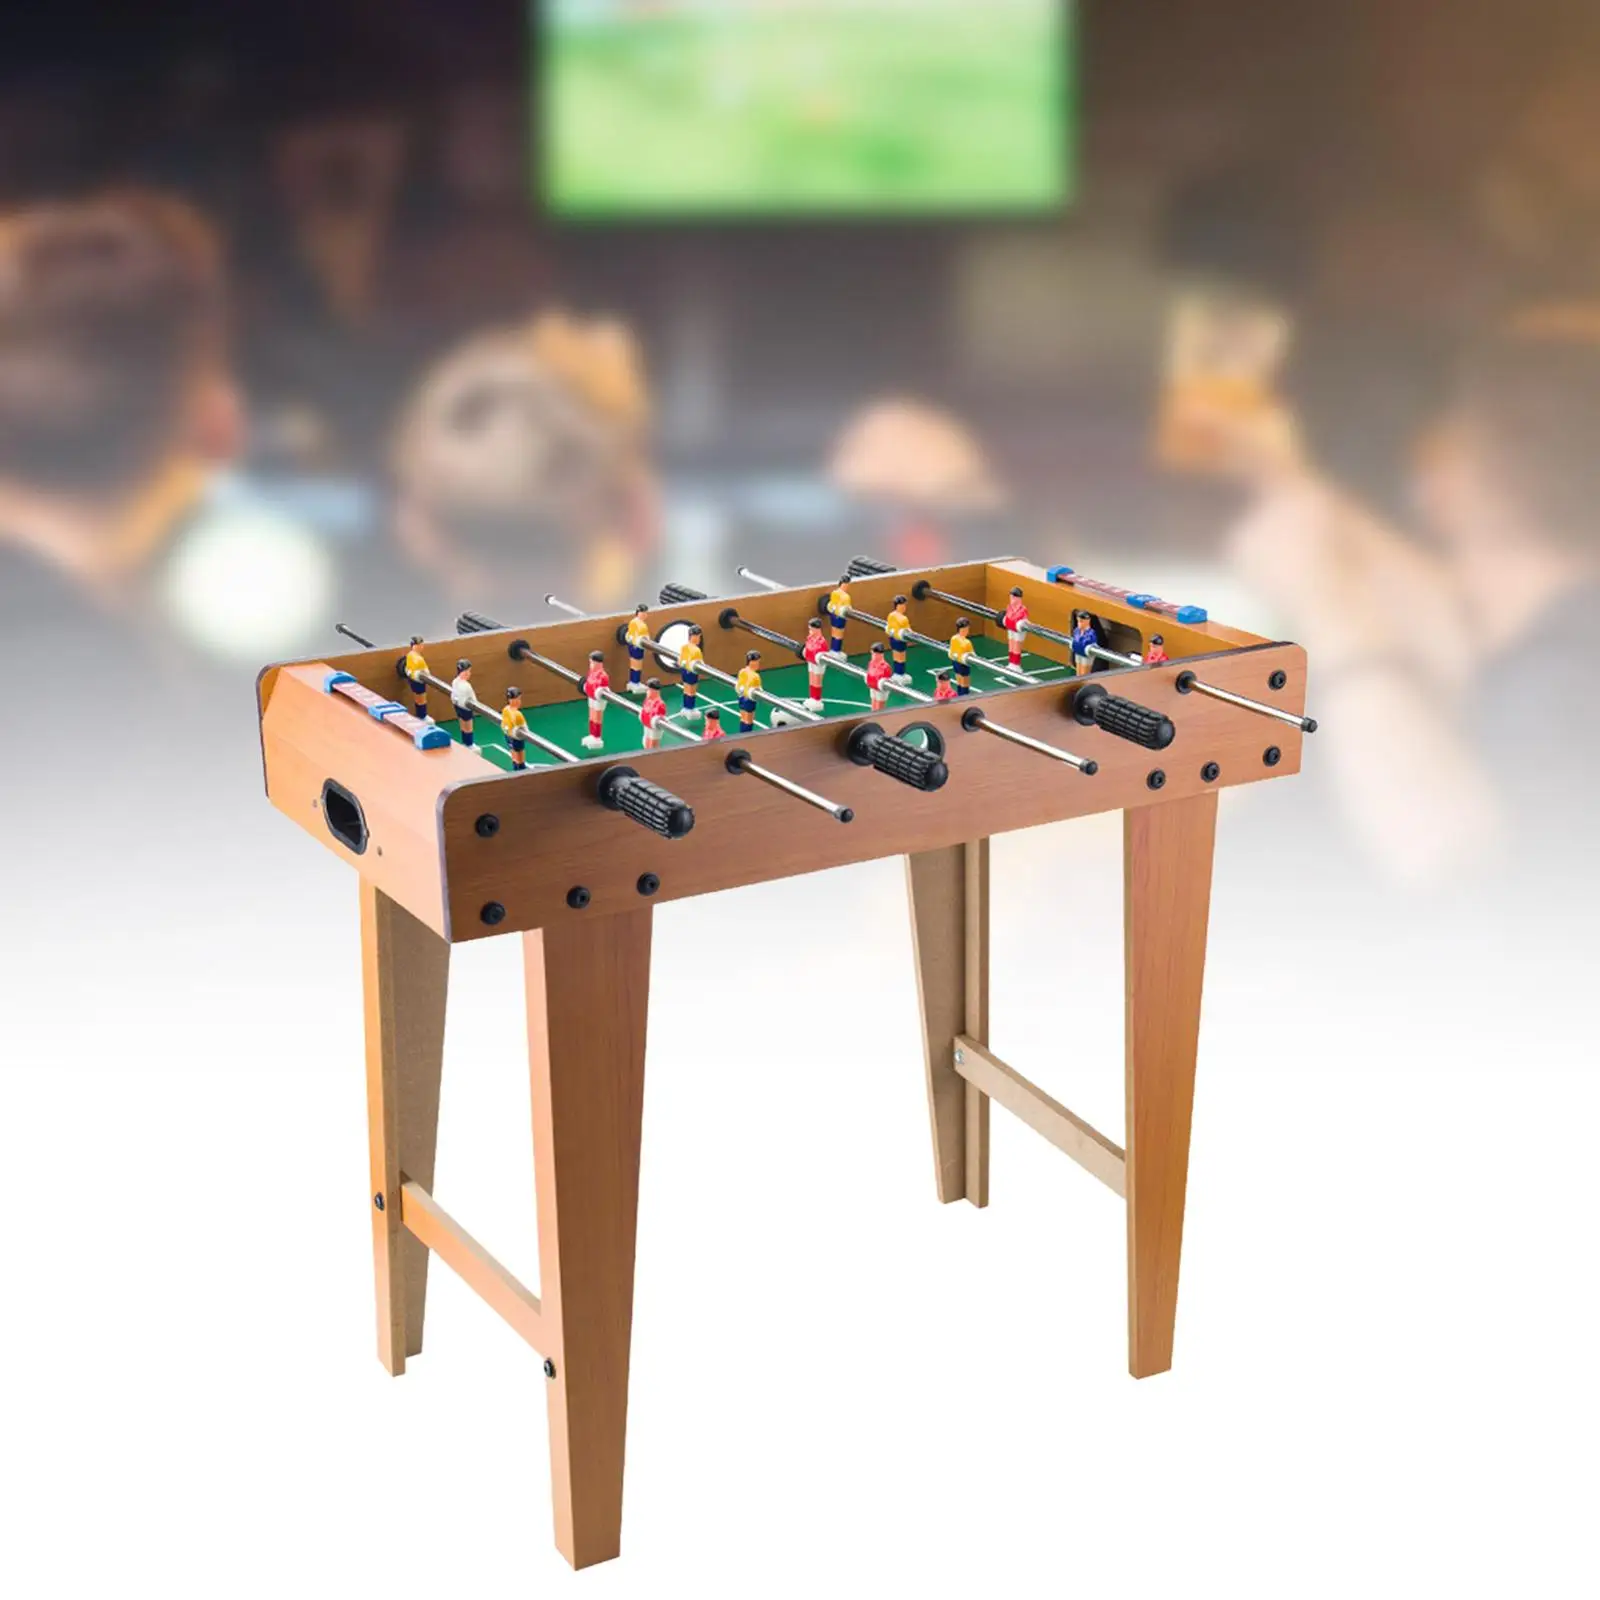 Portable Foosball Table Toy Tabletop Football Soccer Game with Ball Play Sports